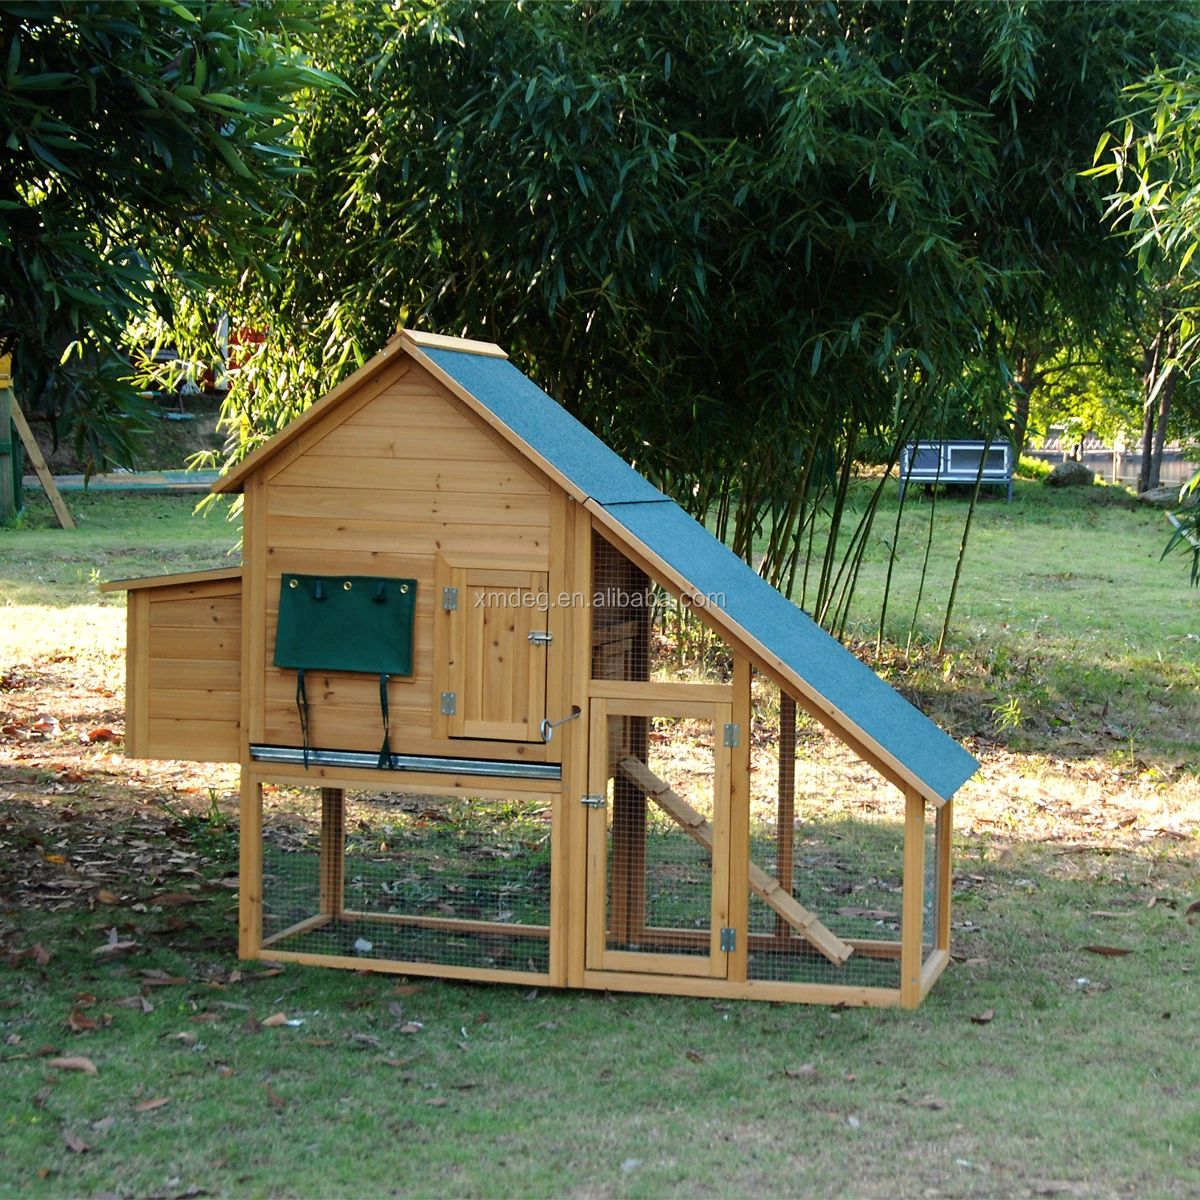 Customized Design hot sale wood Poultry House Chicken coop with large running